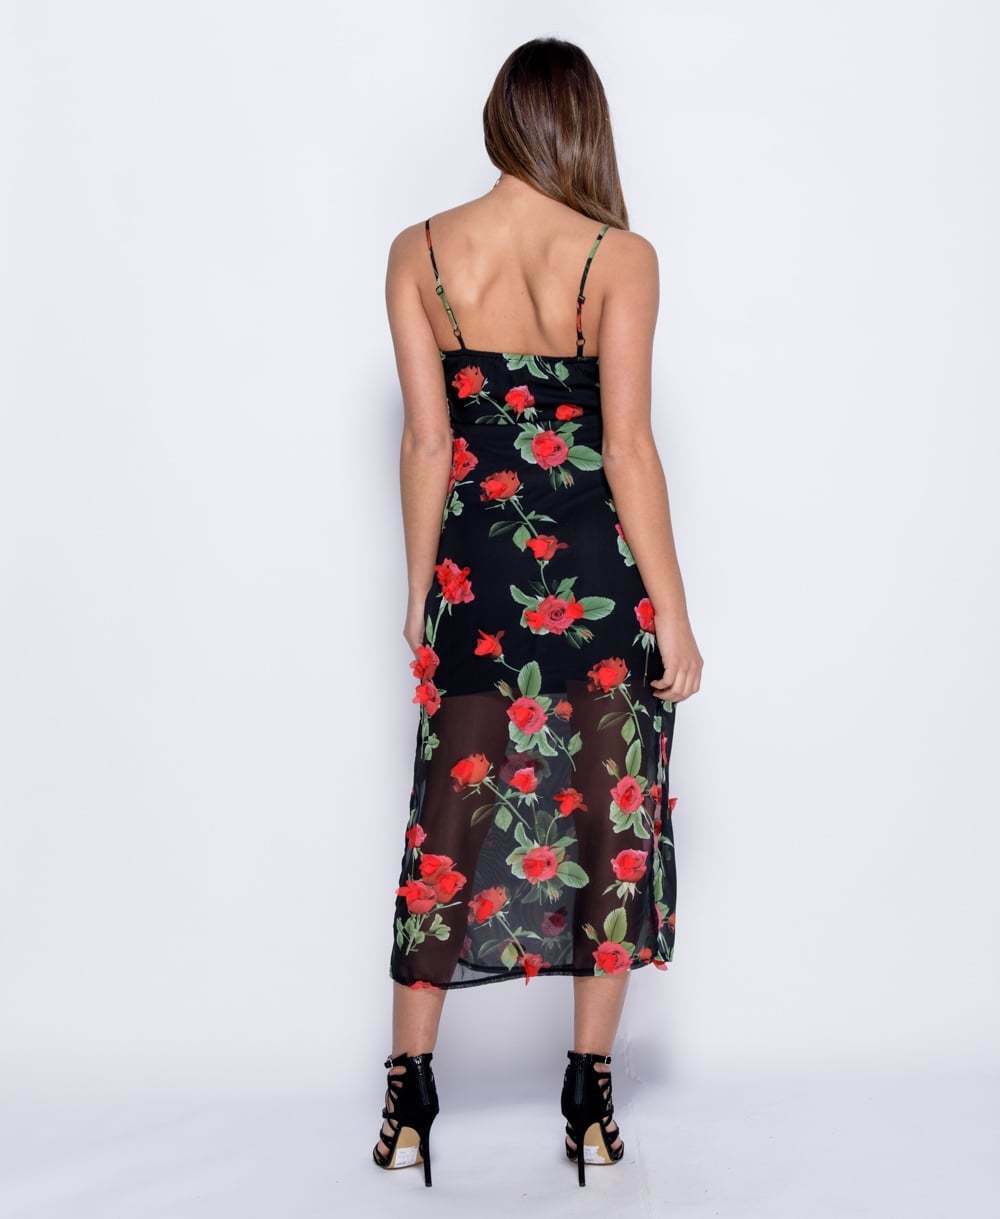 3D Rose Floral Sleeveless Maxi Dress in Black - Back View